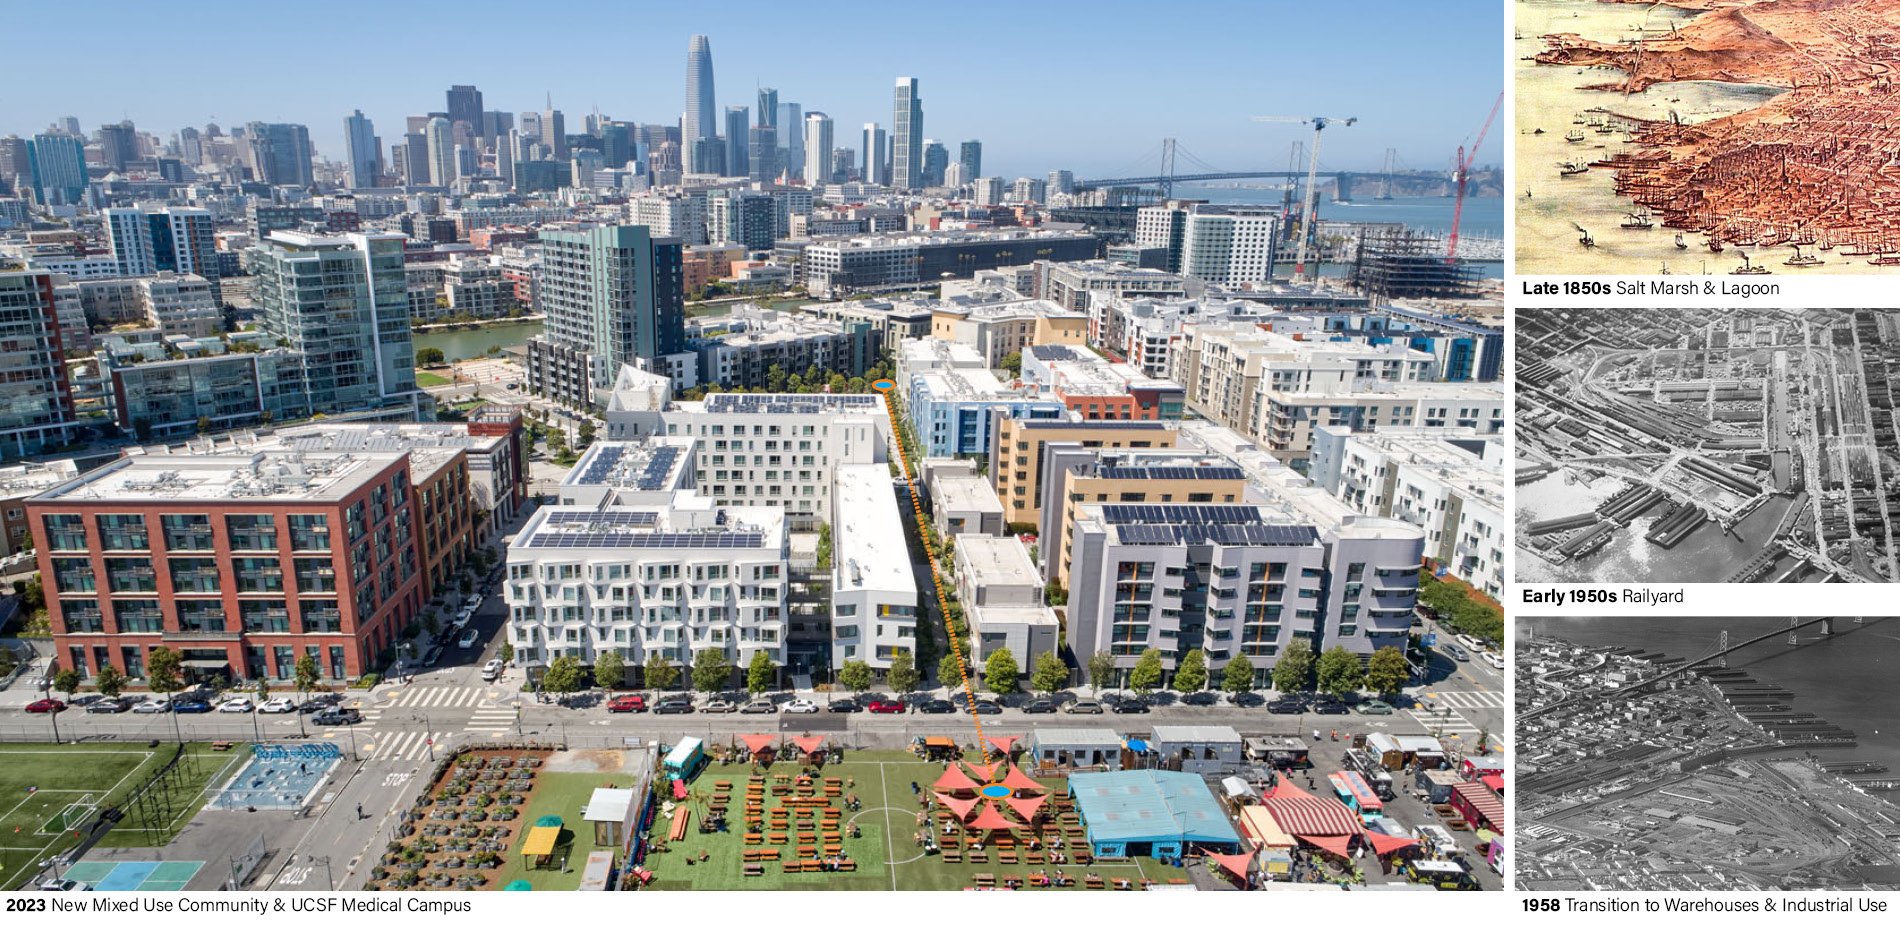 Mission Bay History From Salt Marsh to Mixed Use Community